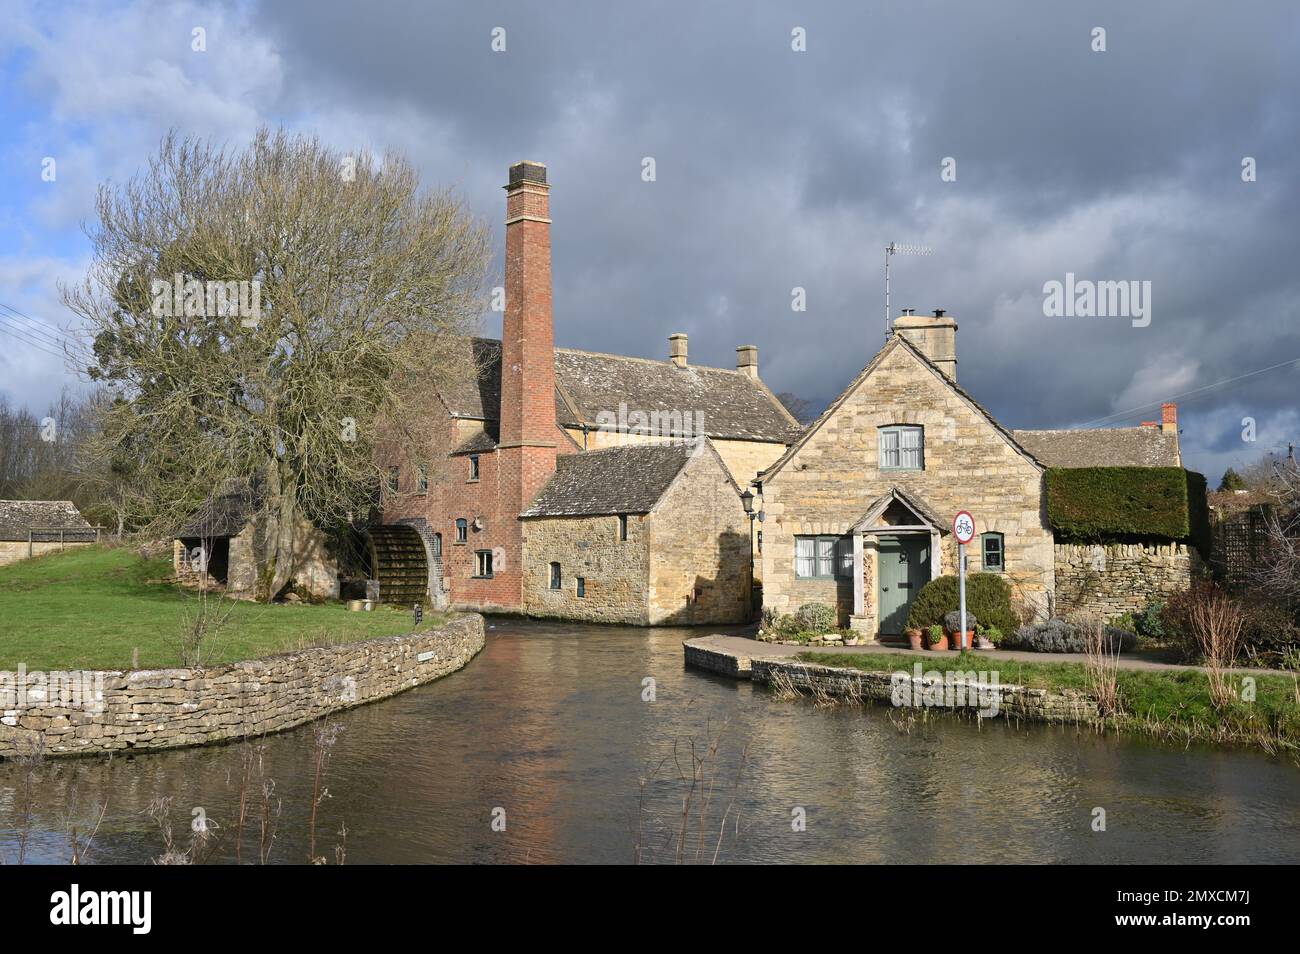 The Old Mill which stands on the River Eye in the Cotswold village of Lower Slaughter, Gloucestershire Stock Photo